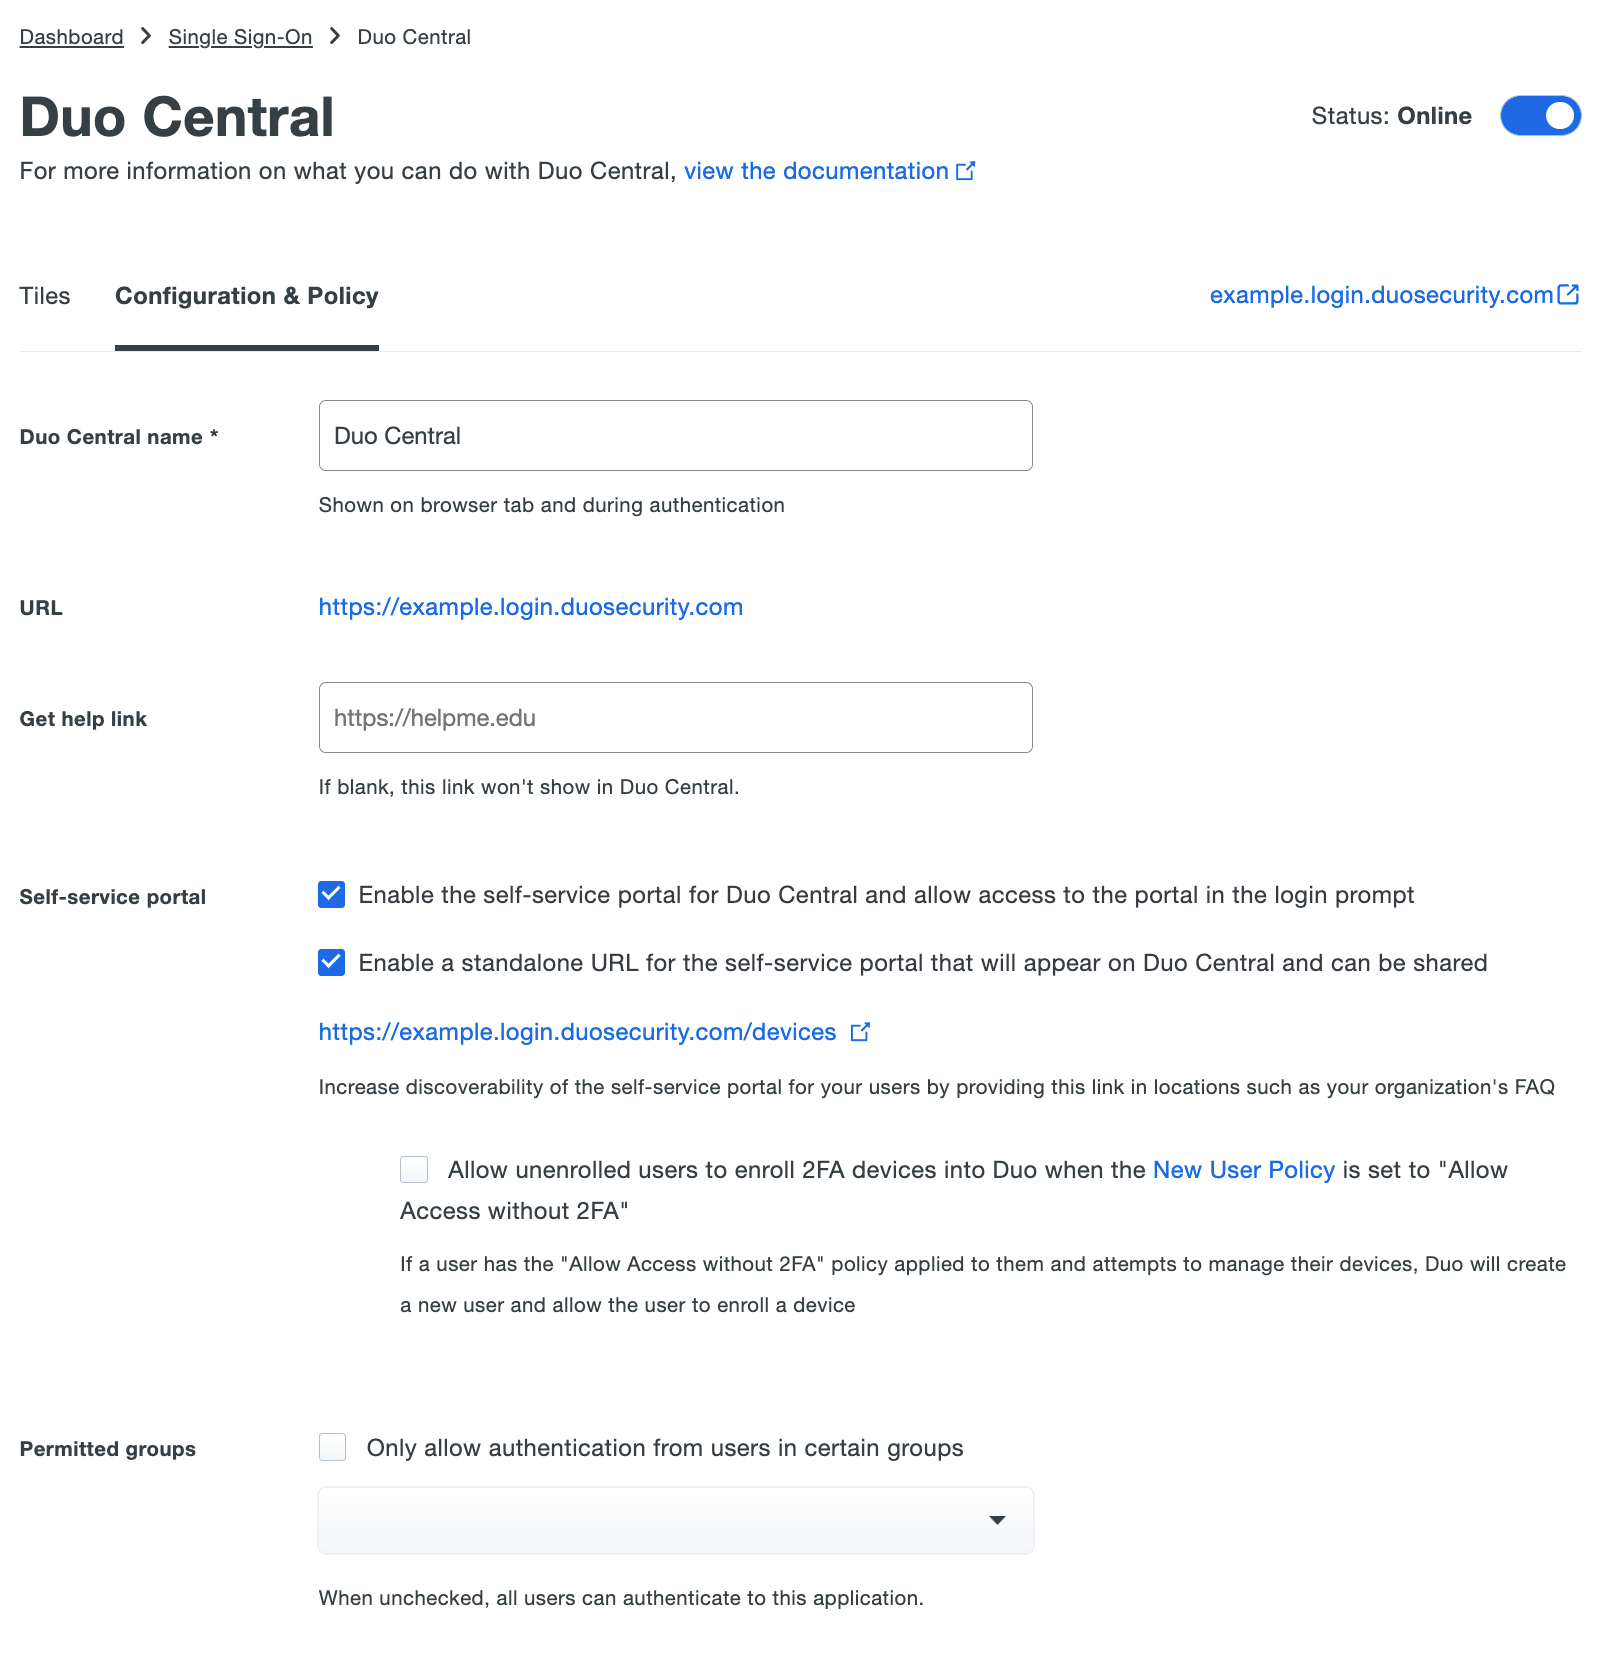 Duo Central Configuration page